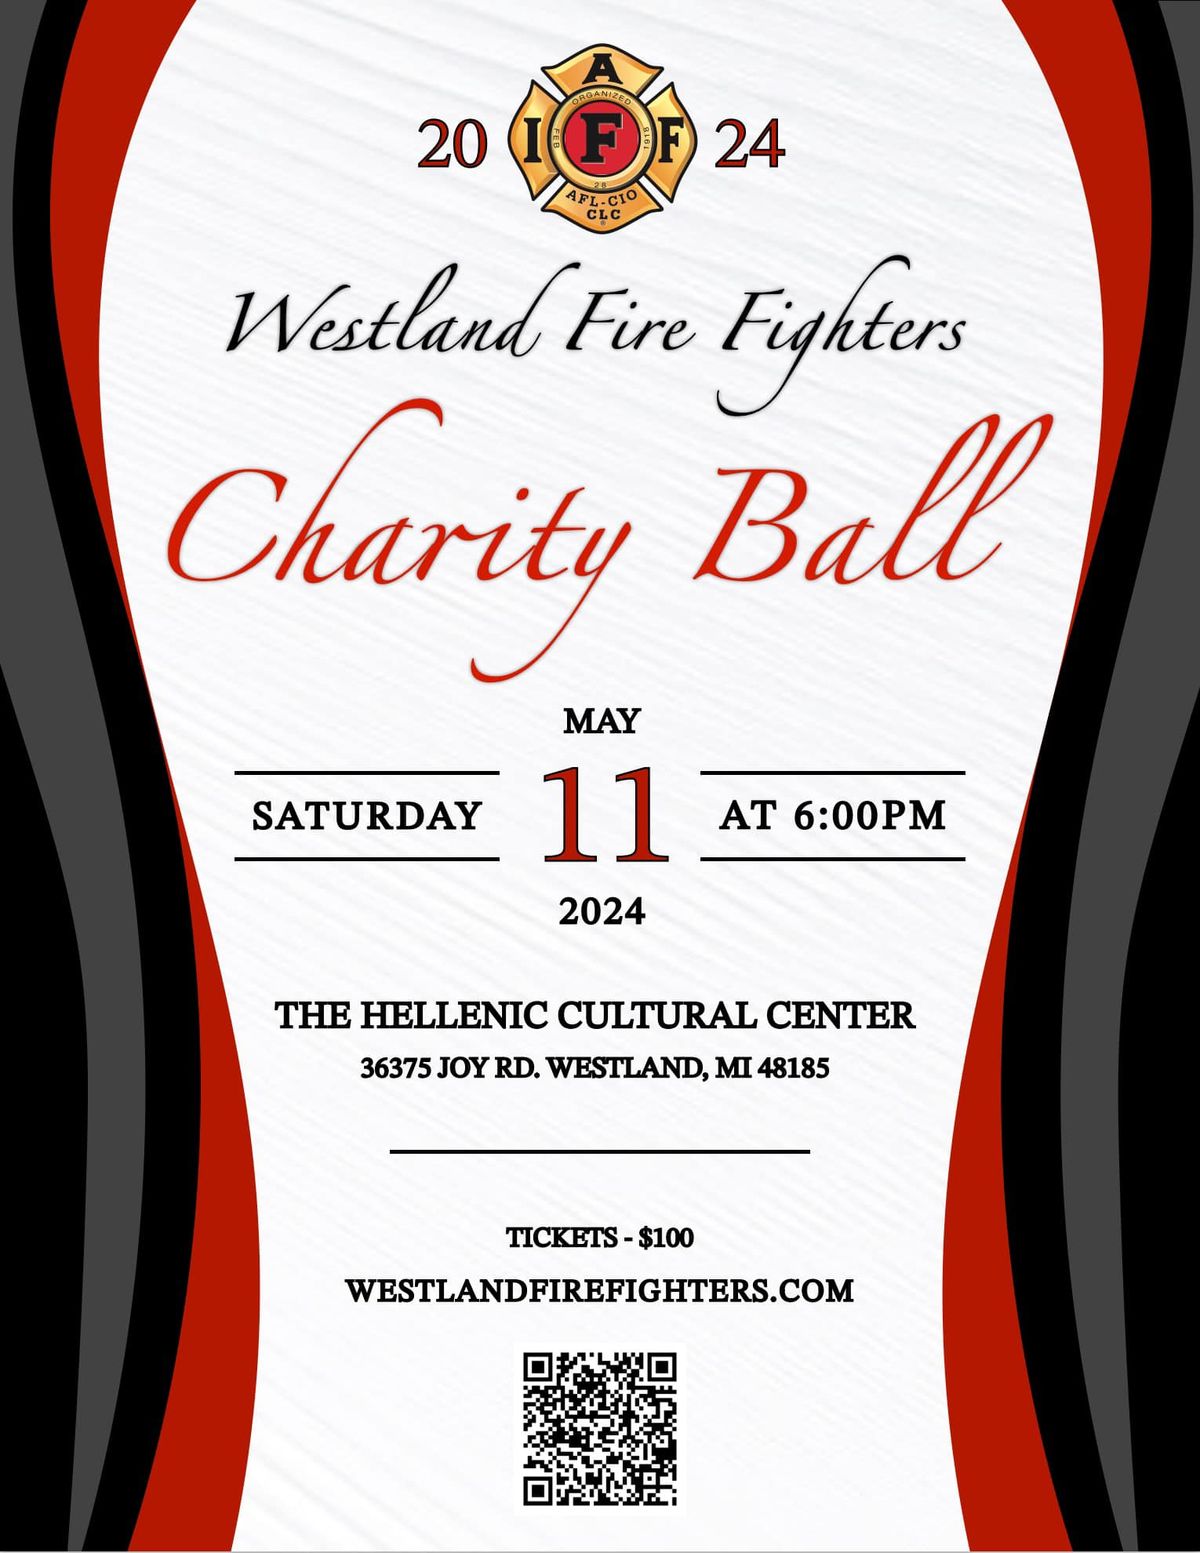 Westland Fire Fighters Charity Ball